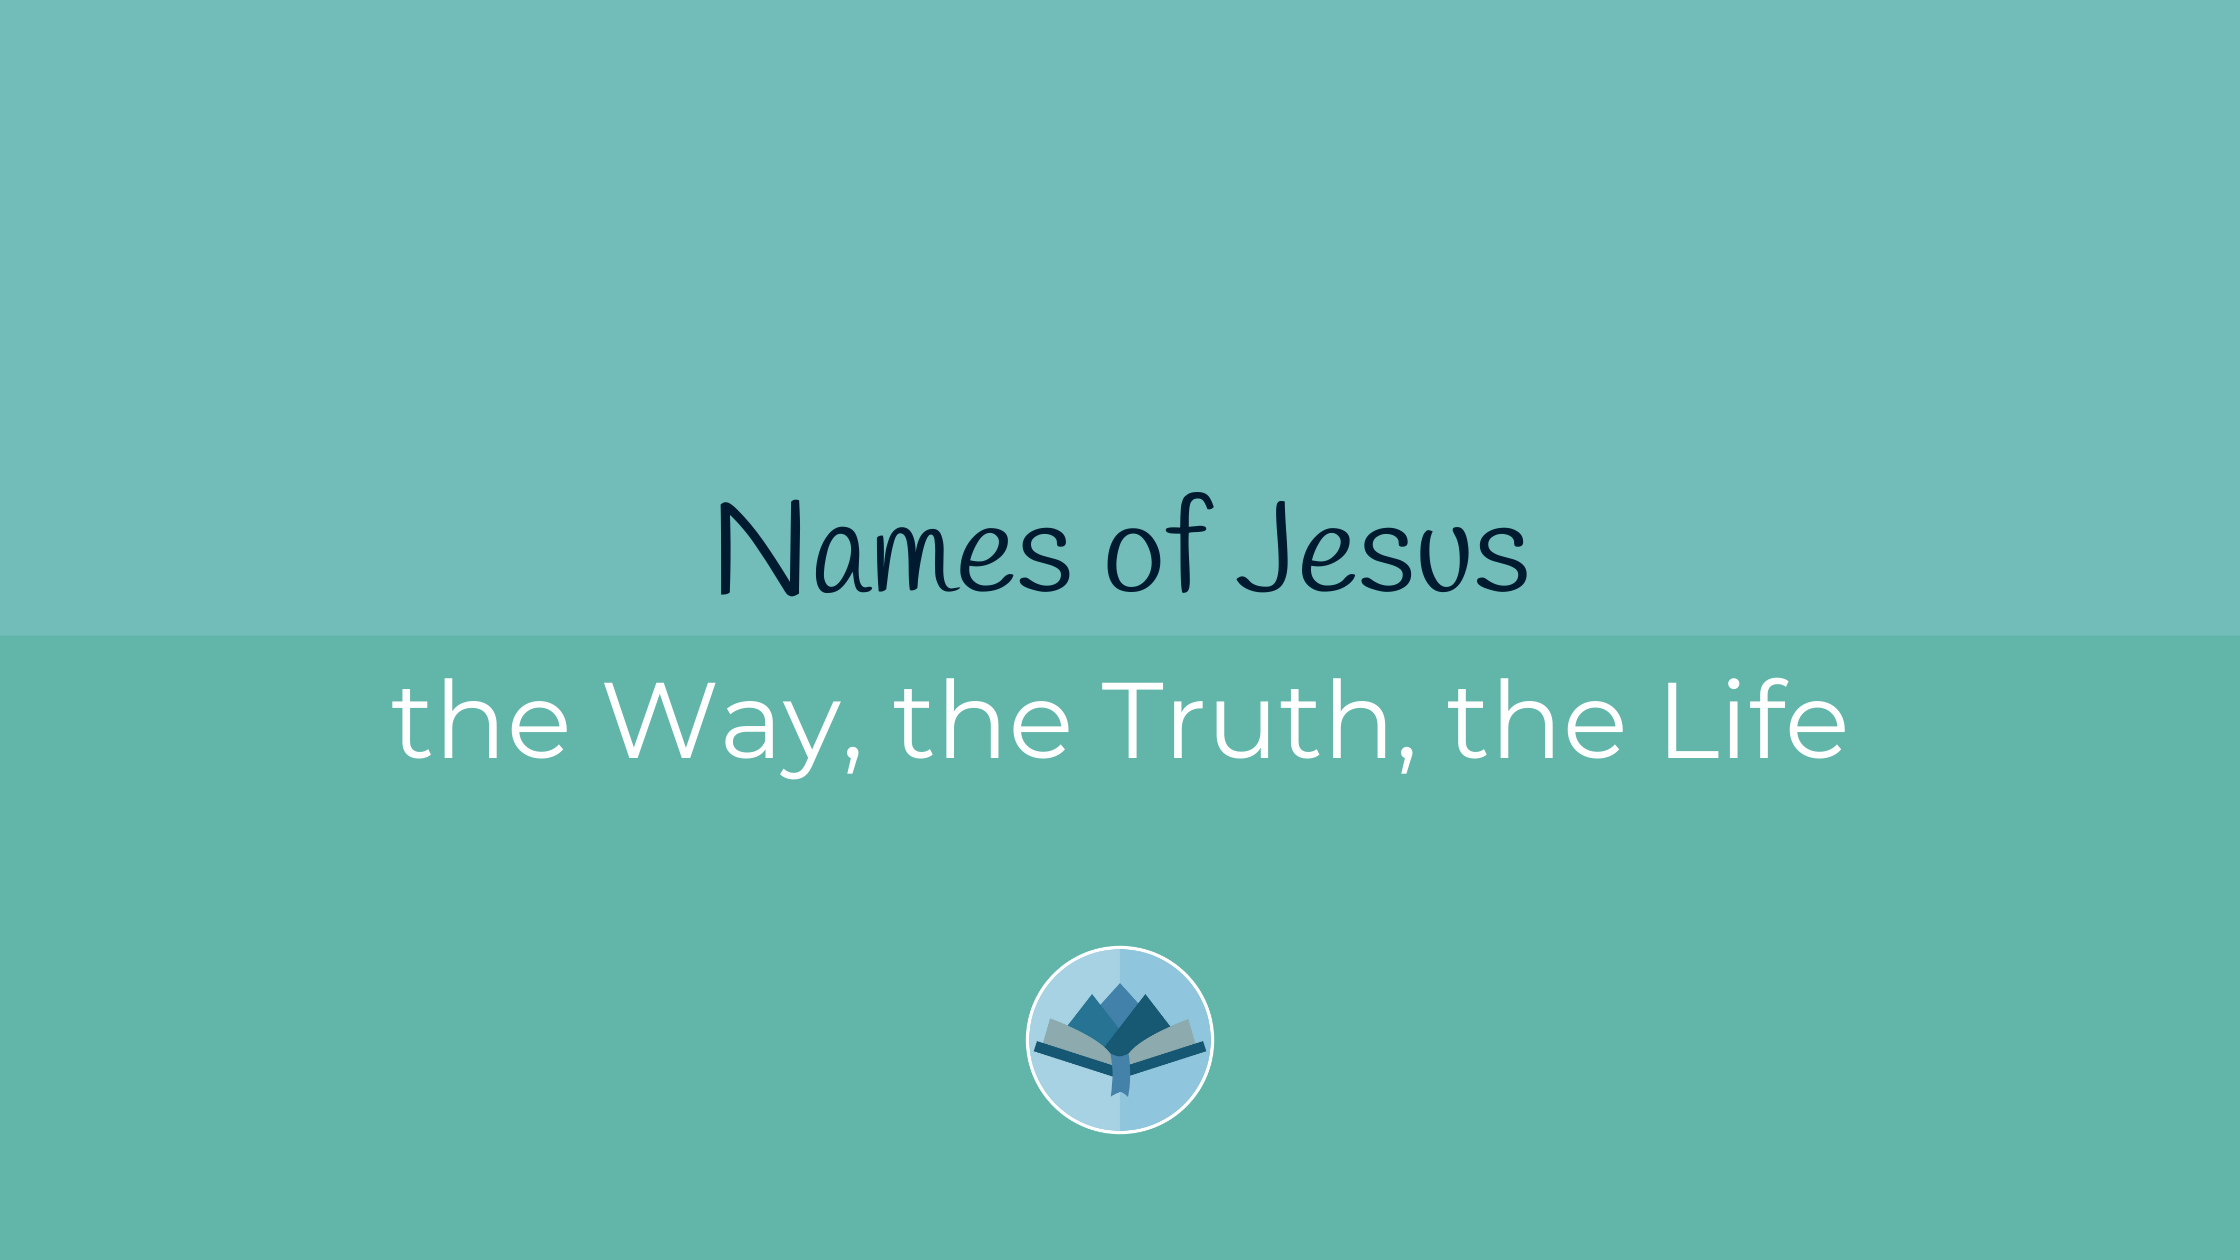 Names of Jesus the Way, the Truth, the Life